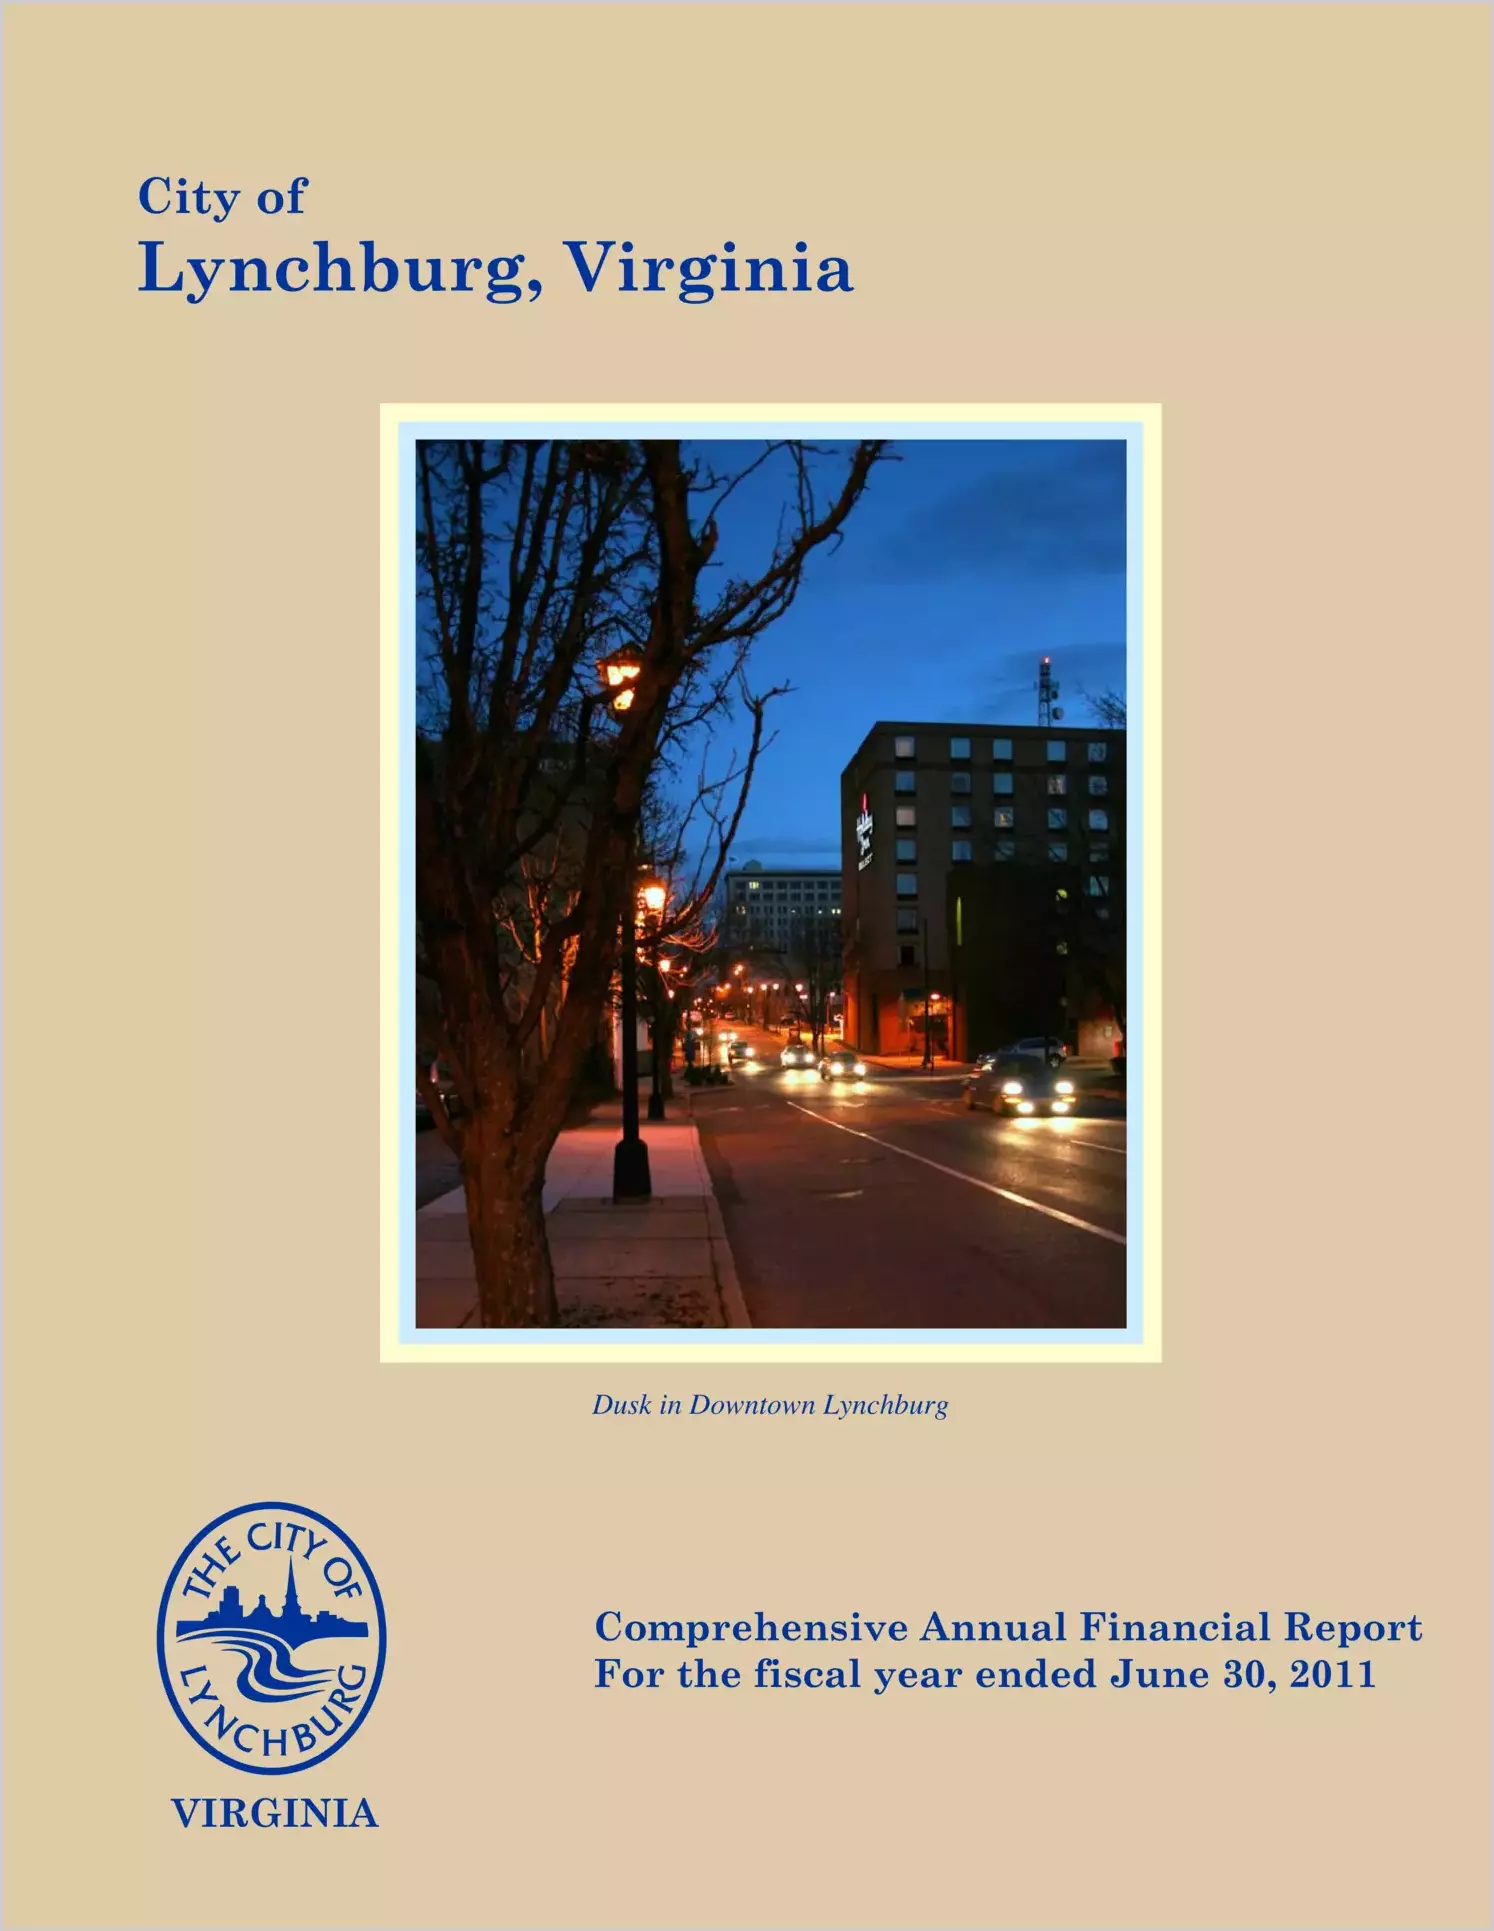 2011 Annual Financial Report for City of Lynchburg